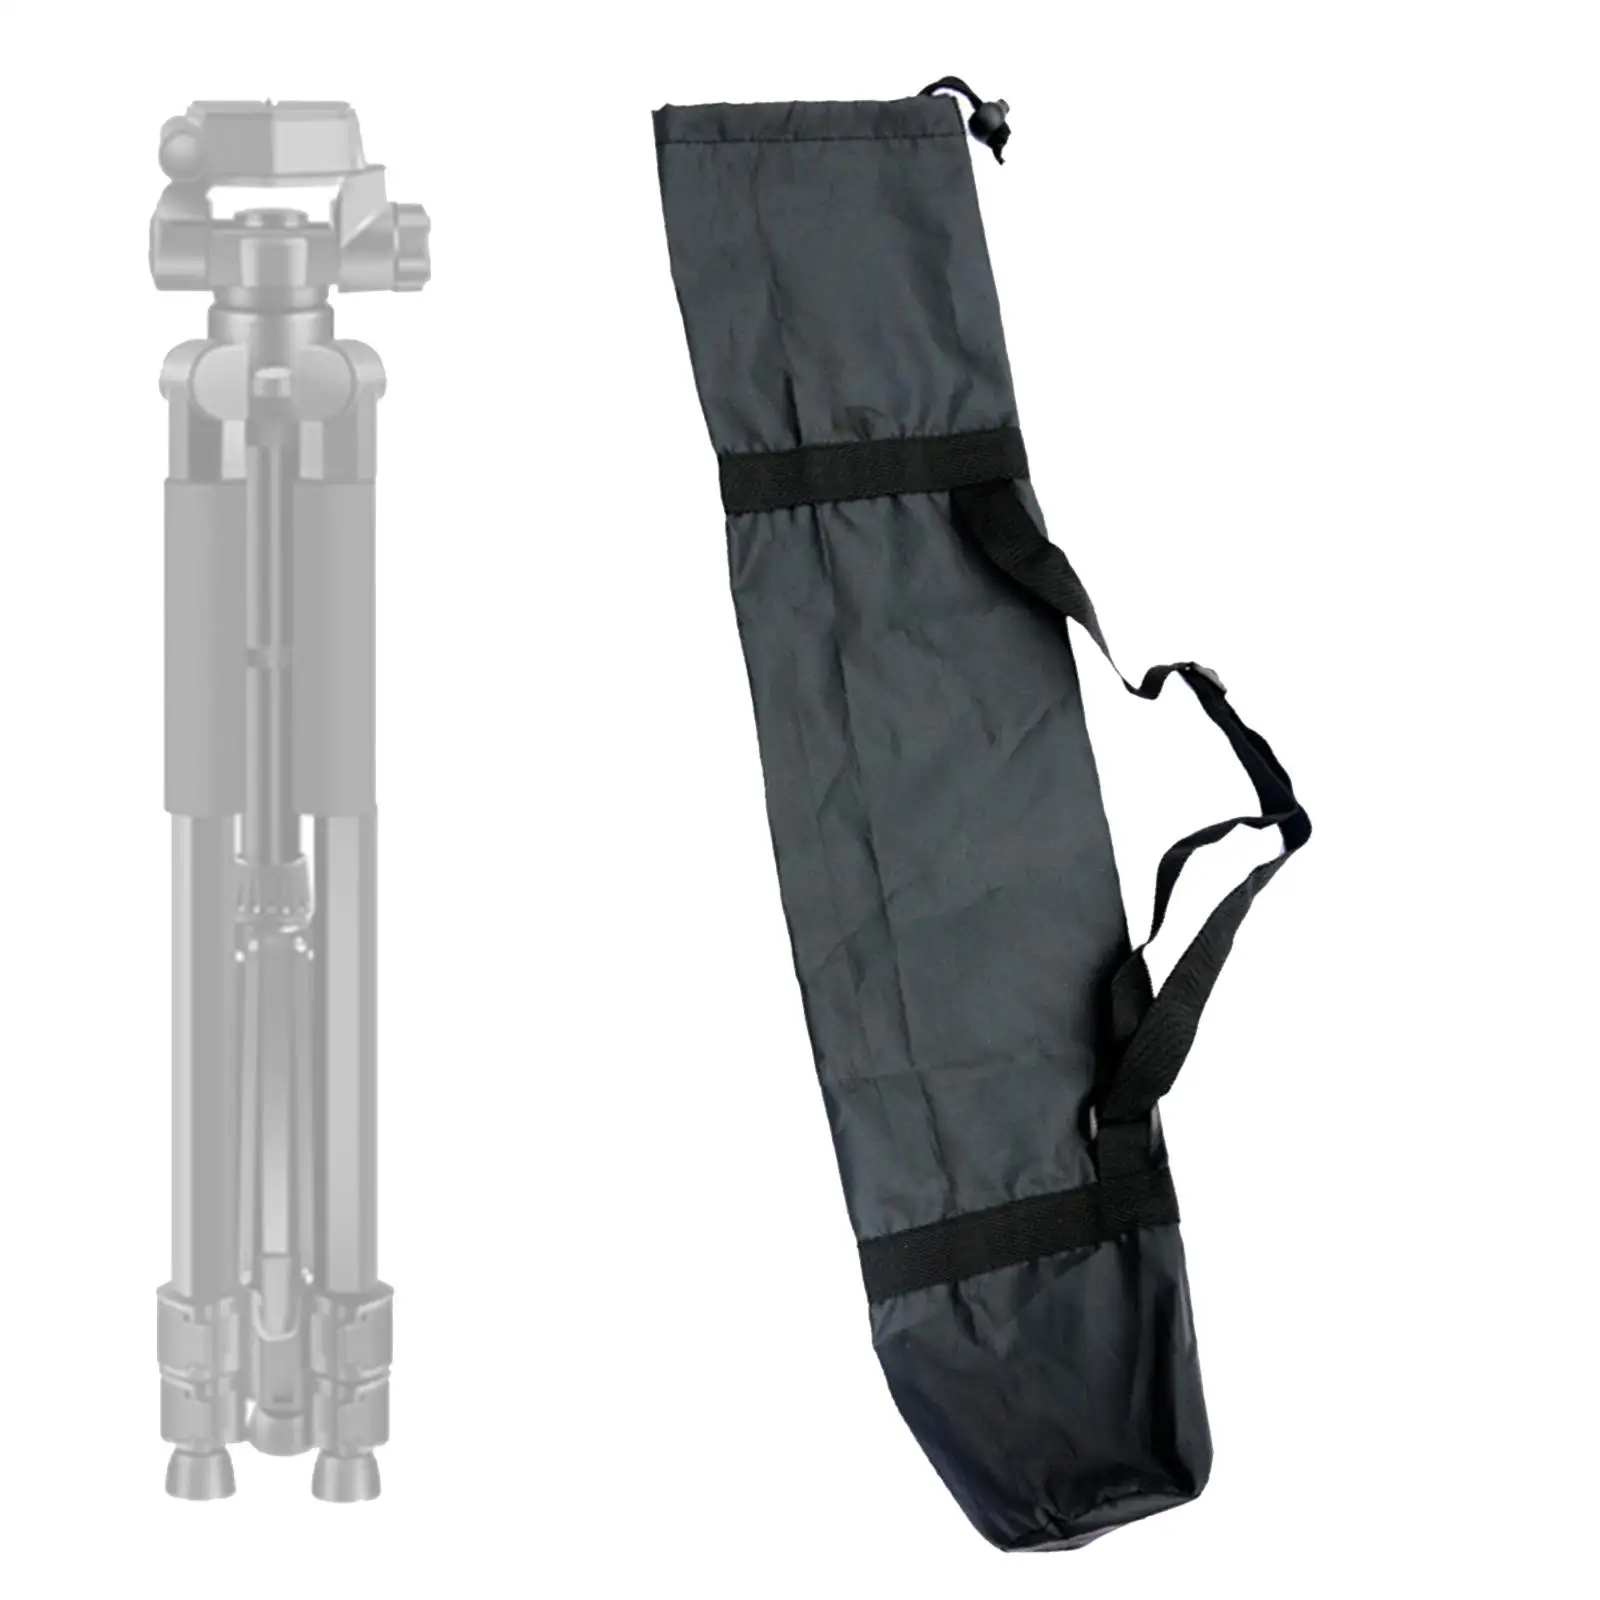 Tripod Carrying Case Drawstring Storage Bag Yoga Mat Carrier Bag for Photography Photo Studio Equipment Light Stand Tent Pole